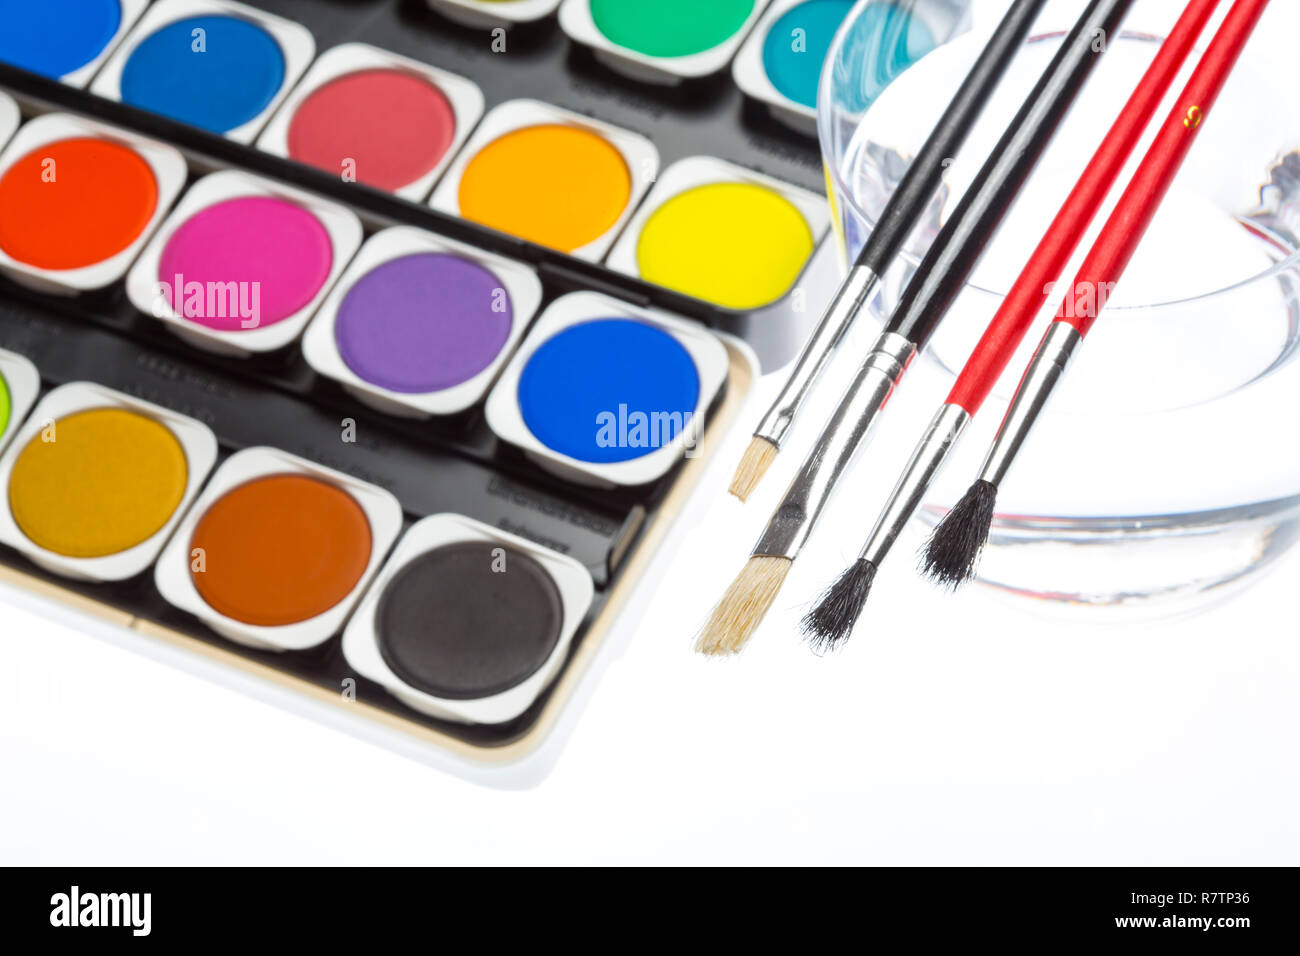 https://c8.alamy.com/comp/R7TP36/water-colours-paint-box-with-various-colours-and-brushes-R7TP36.jpg